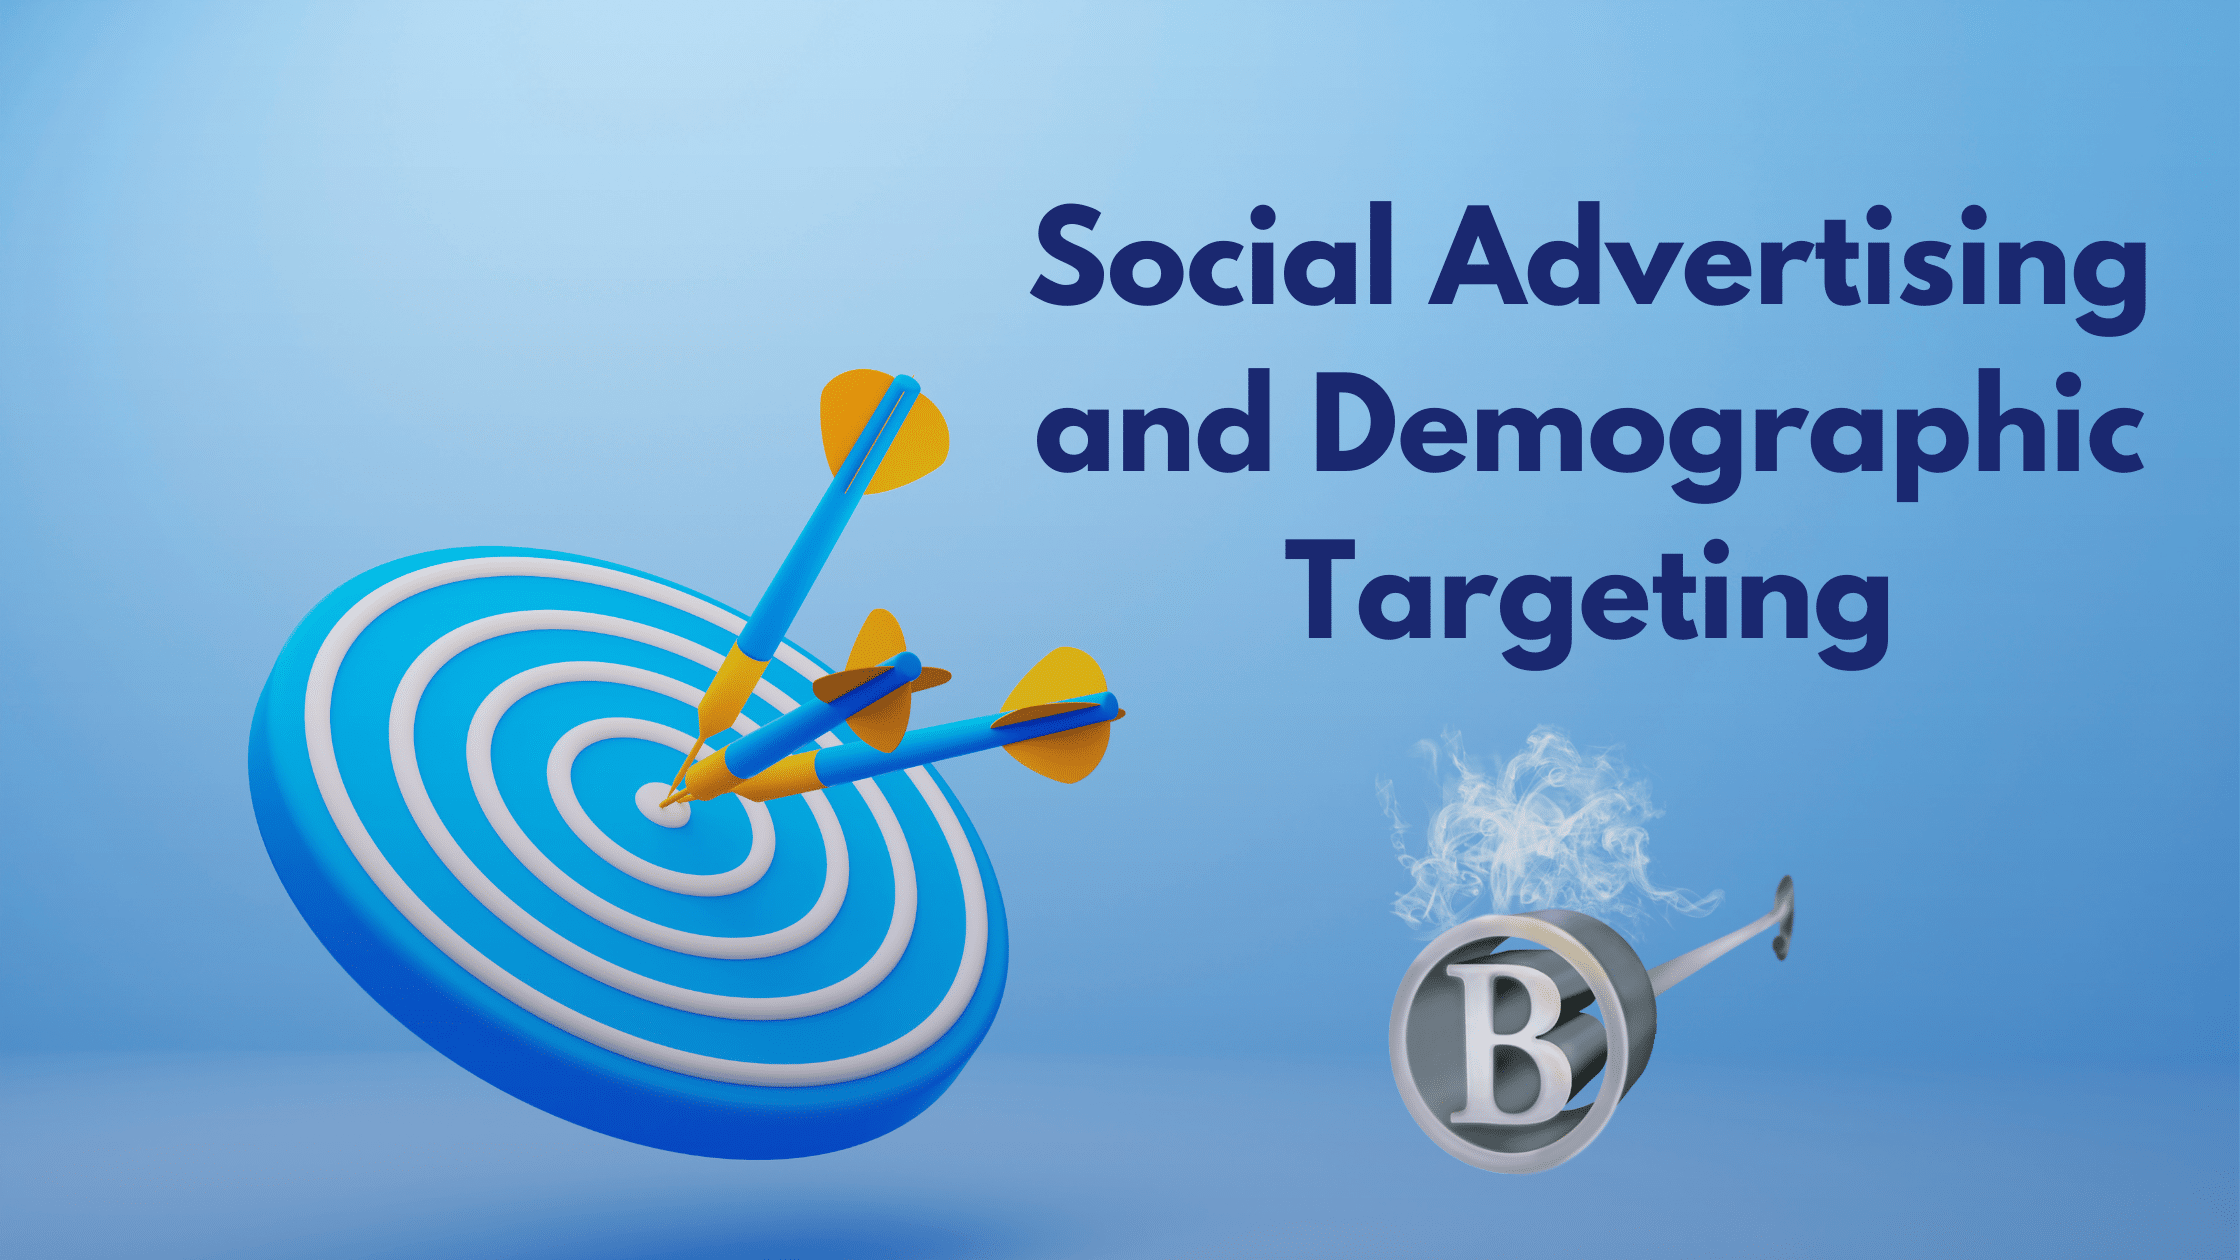 Social Advertising and Demographic Targeting